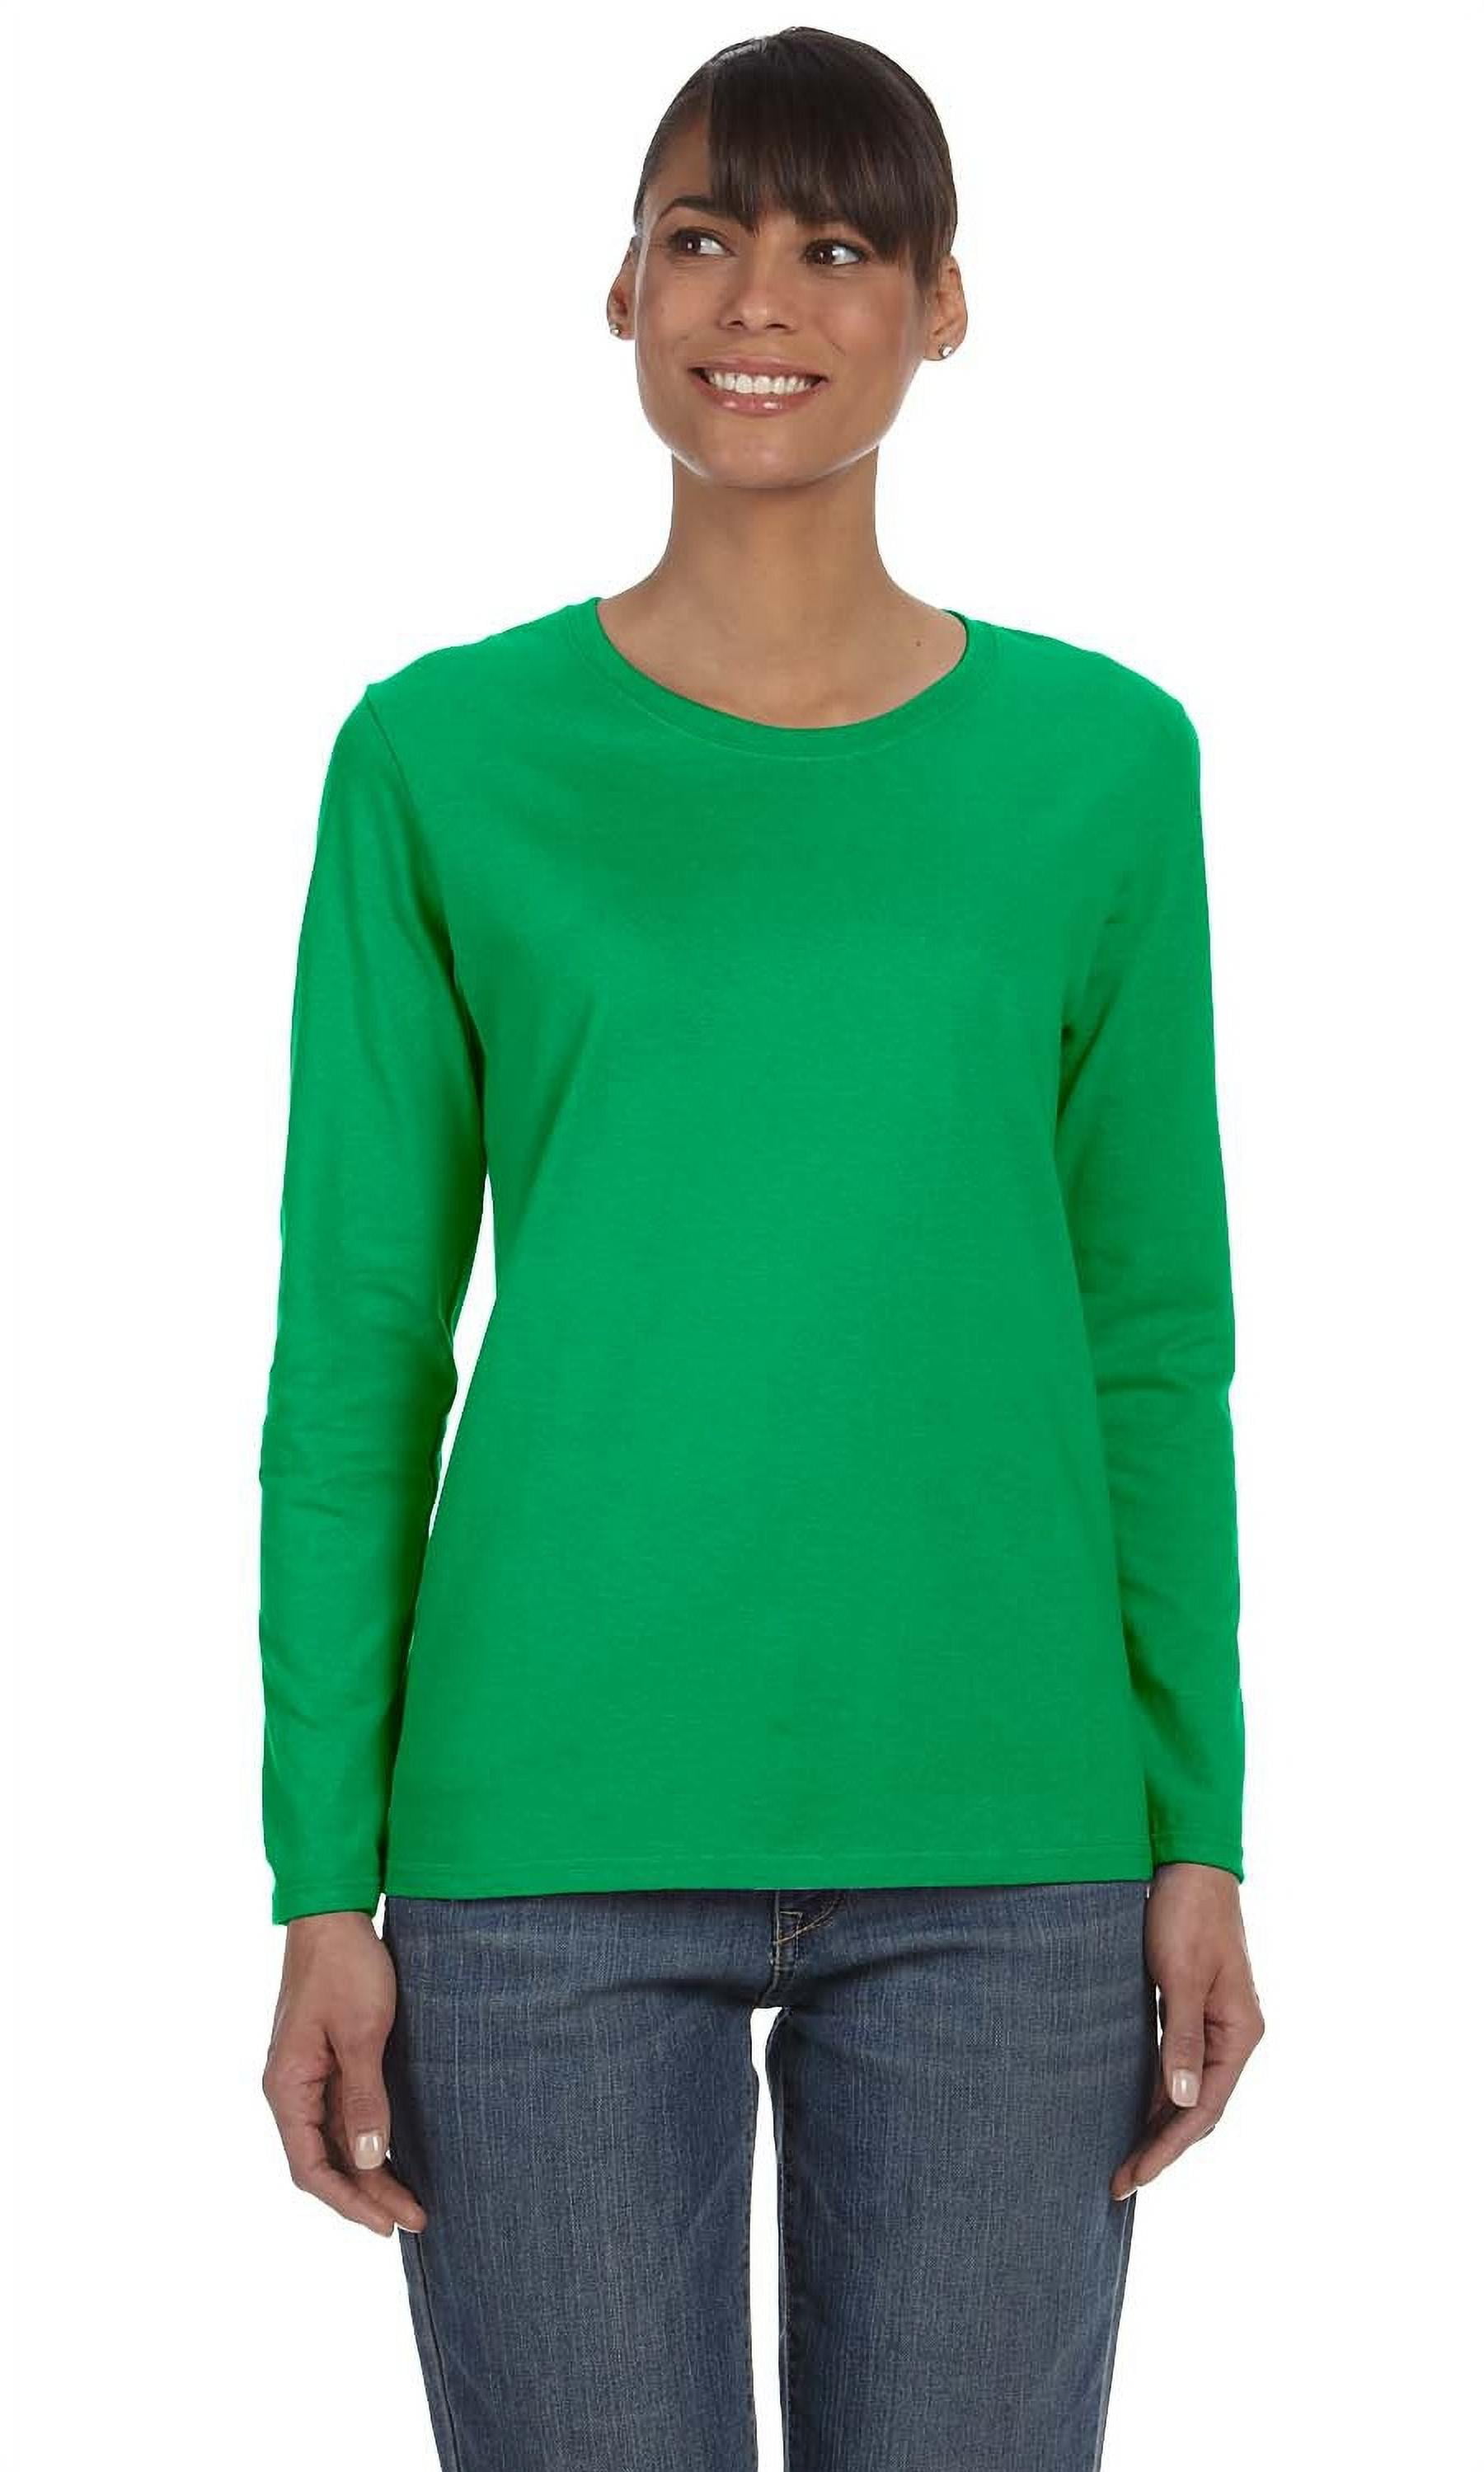 Solid Cotton Jersey Scoop Neck Puff Long Sleeve Tee Shirt Top S,M,L 